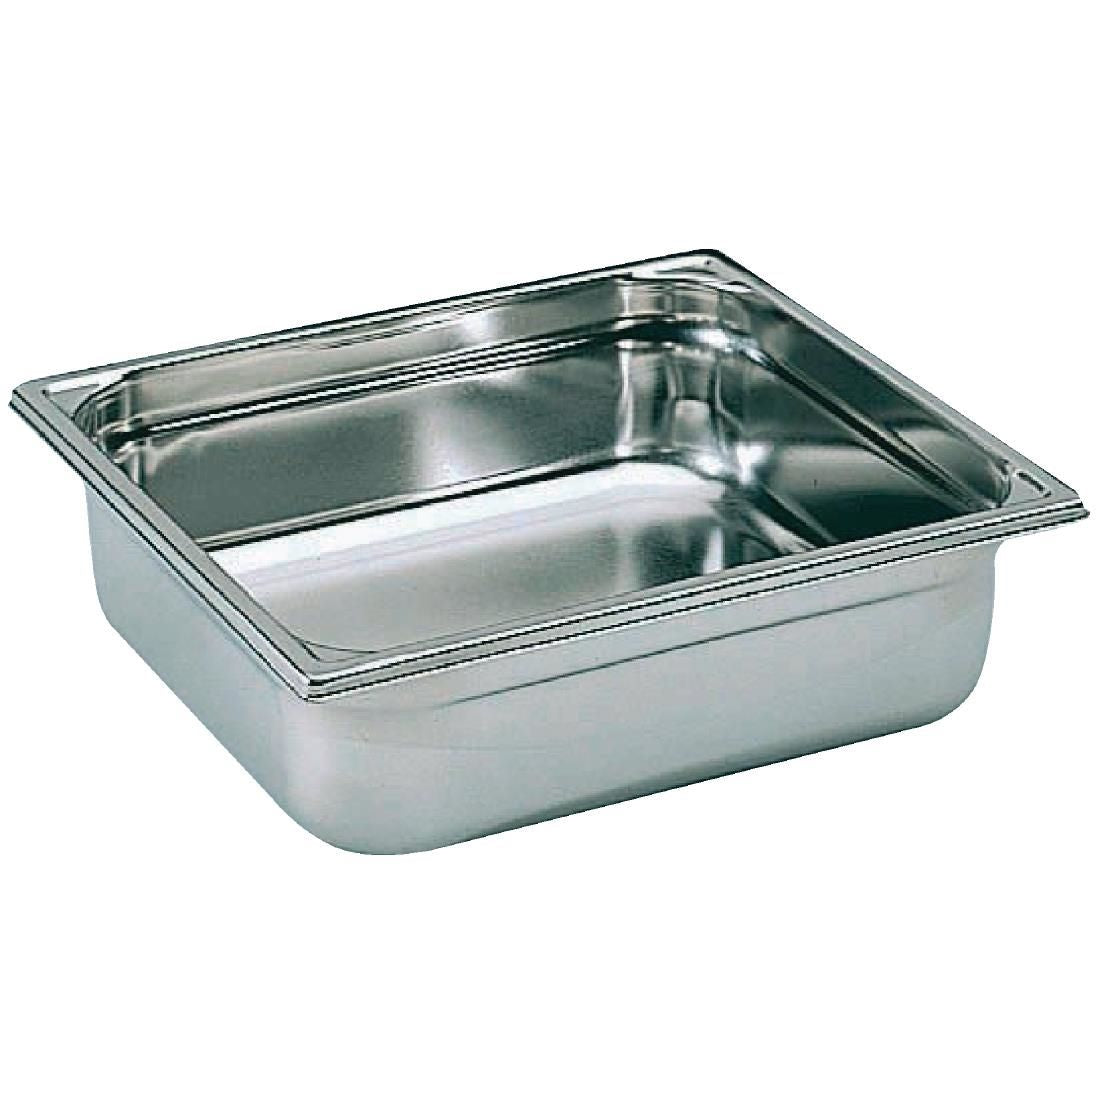 Bourgeat Stainless Steel 2/3 Gastronorm Pan 65mm JD Catering Equipment Solutions Ltd